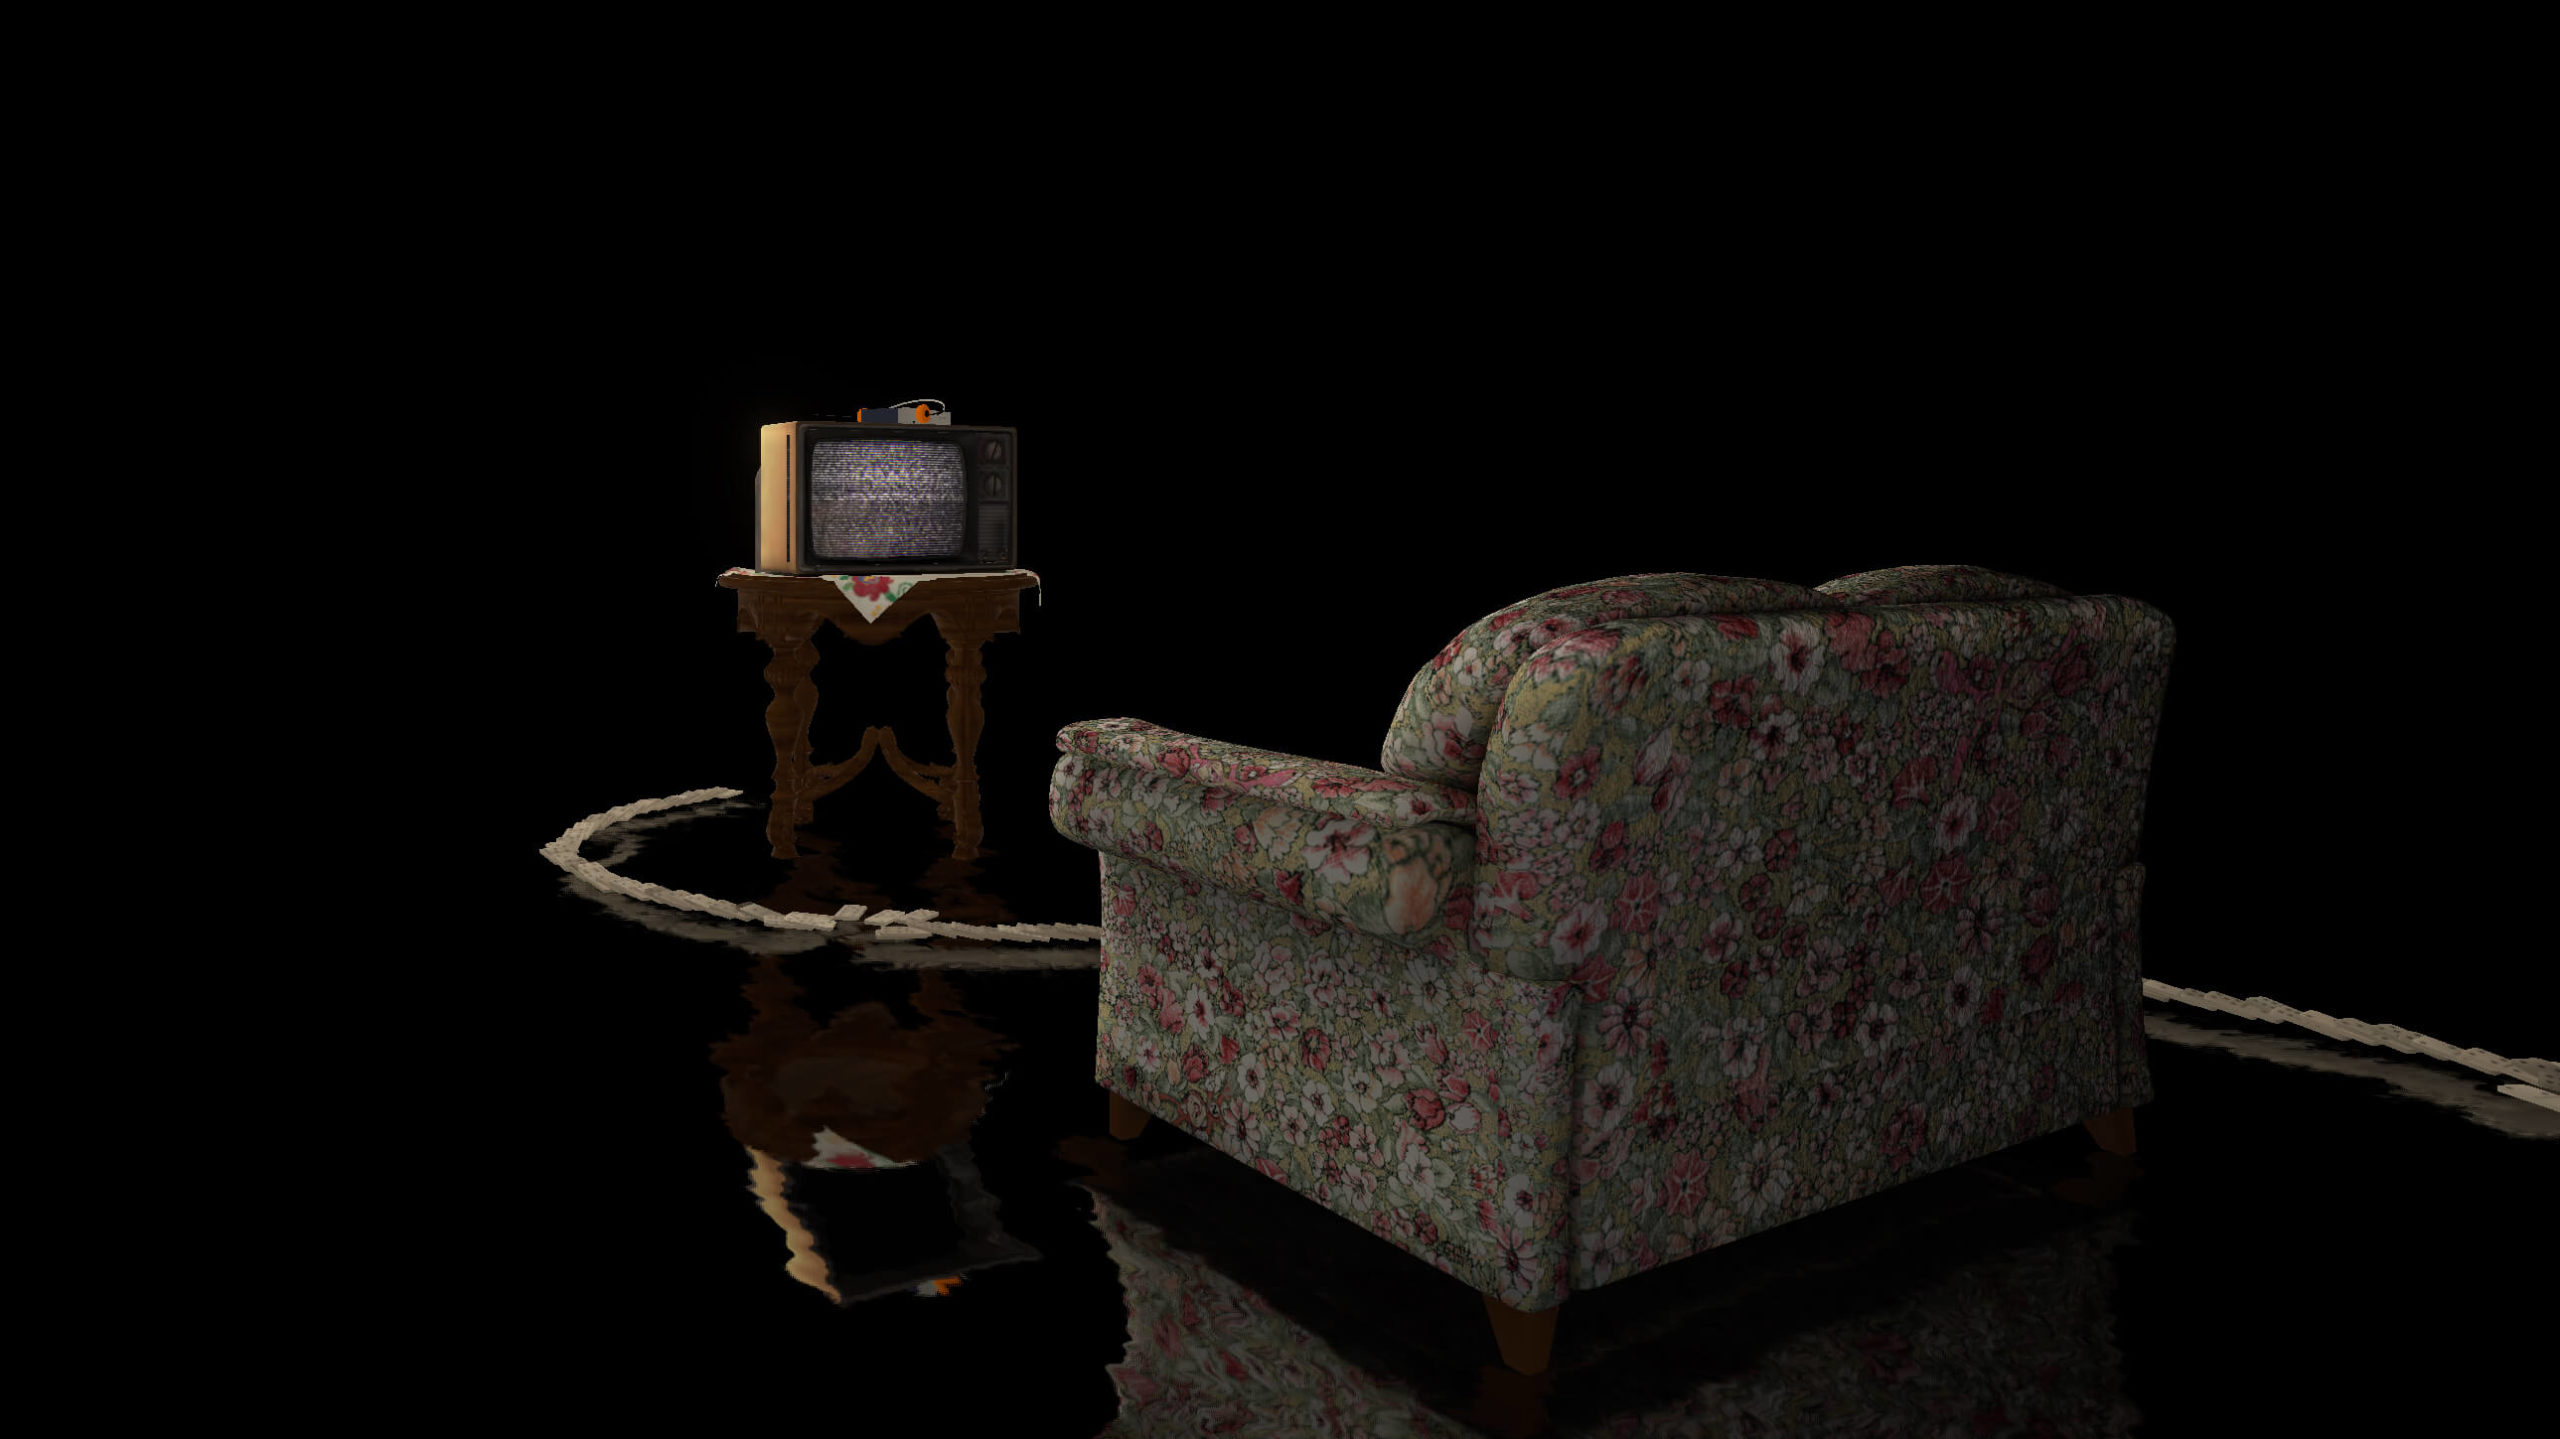 A black void scene like the ones from Stranger Things, featuring an old floral decorated family couch, a static 1980s tv set and domino's scattered on a water like surface.